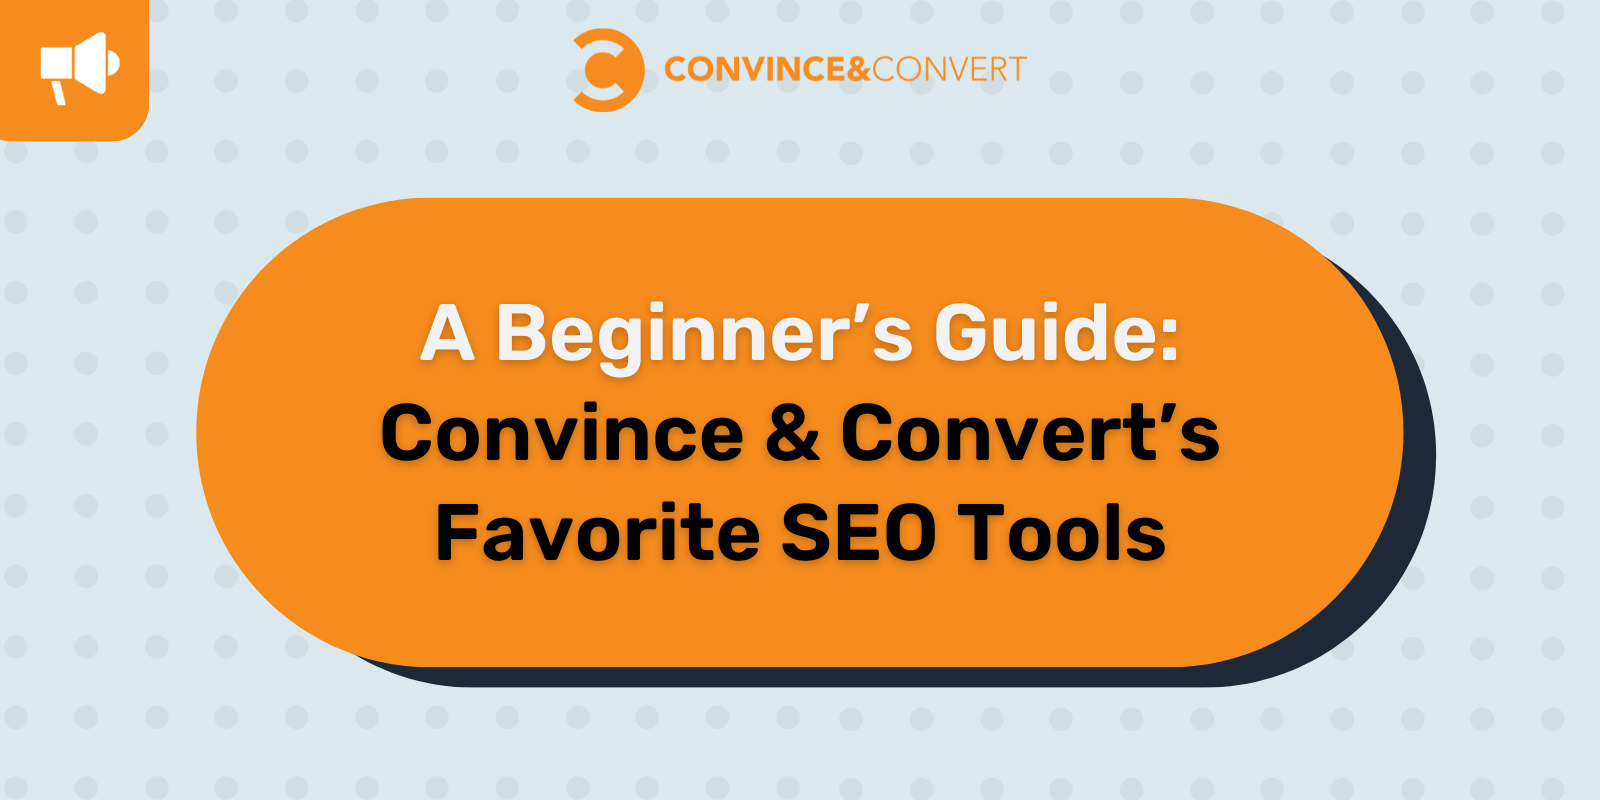 A Beginner’s Guide: Convince & Convert’s Favorite SEO Tools